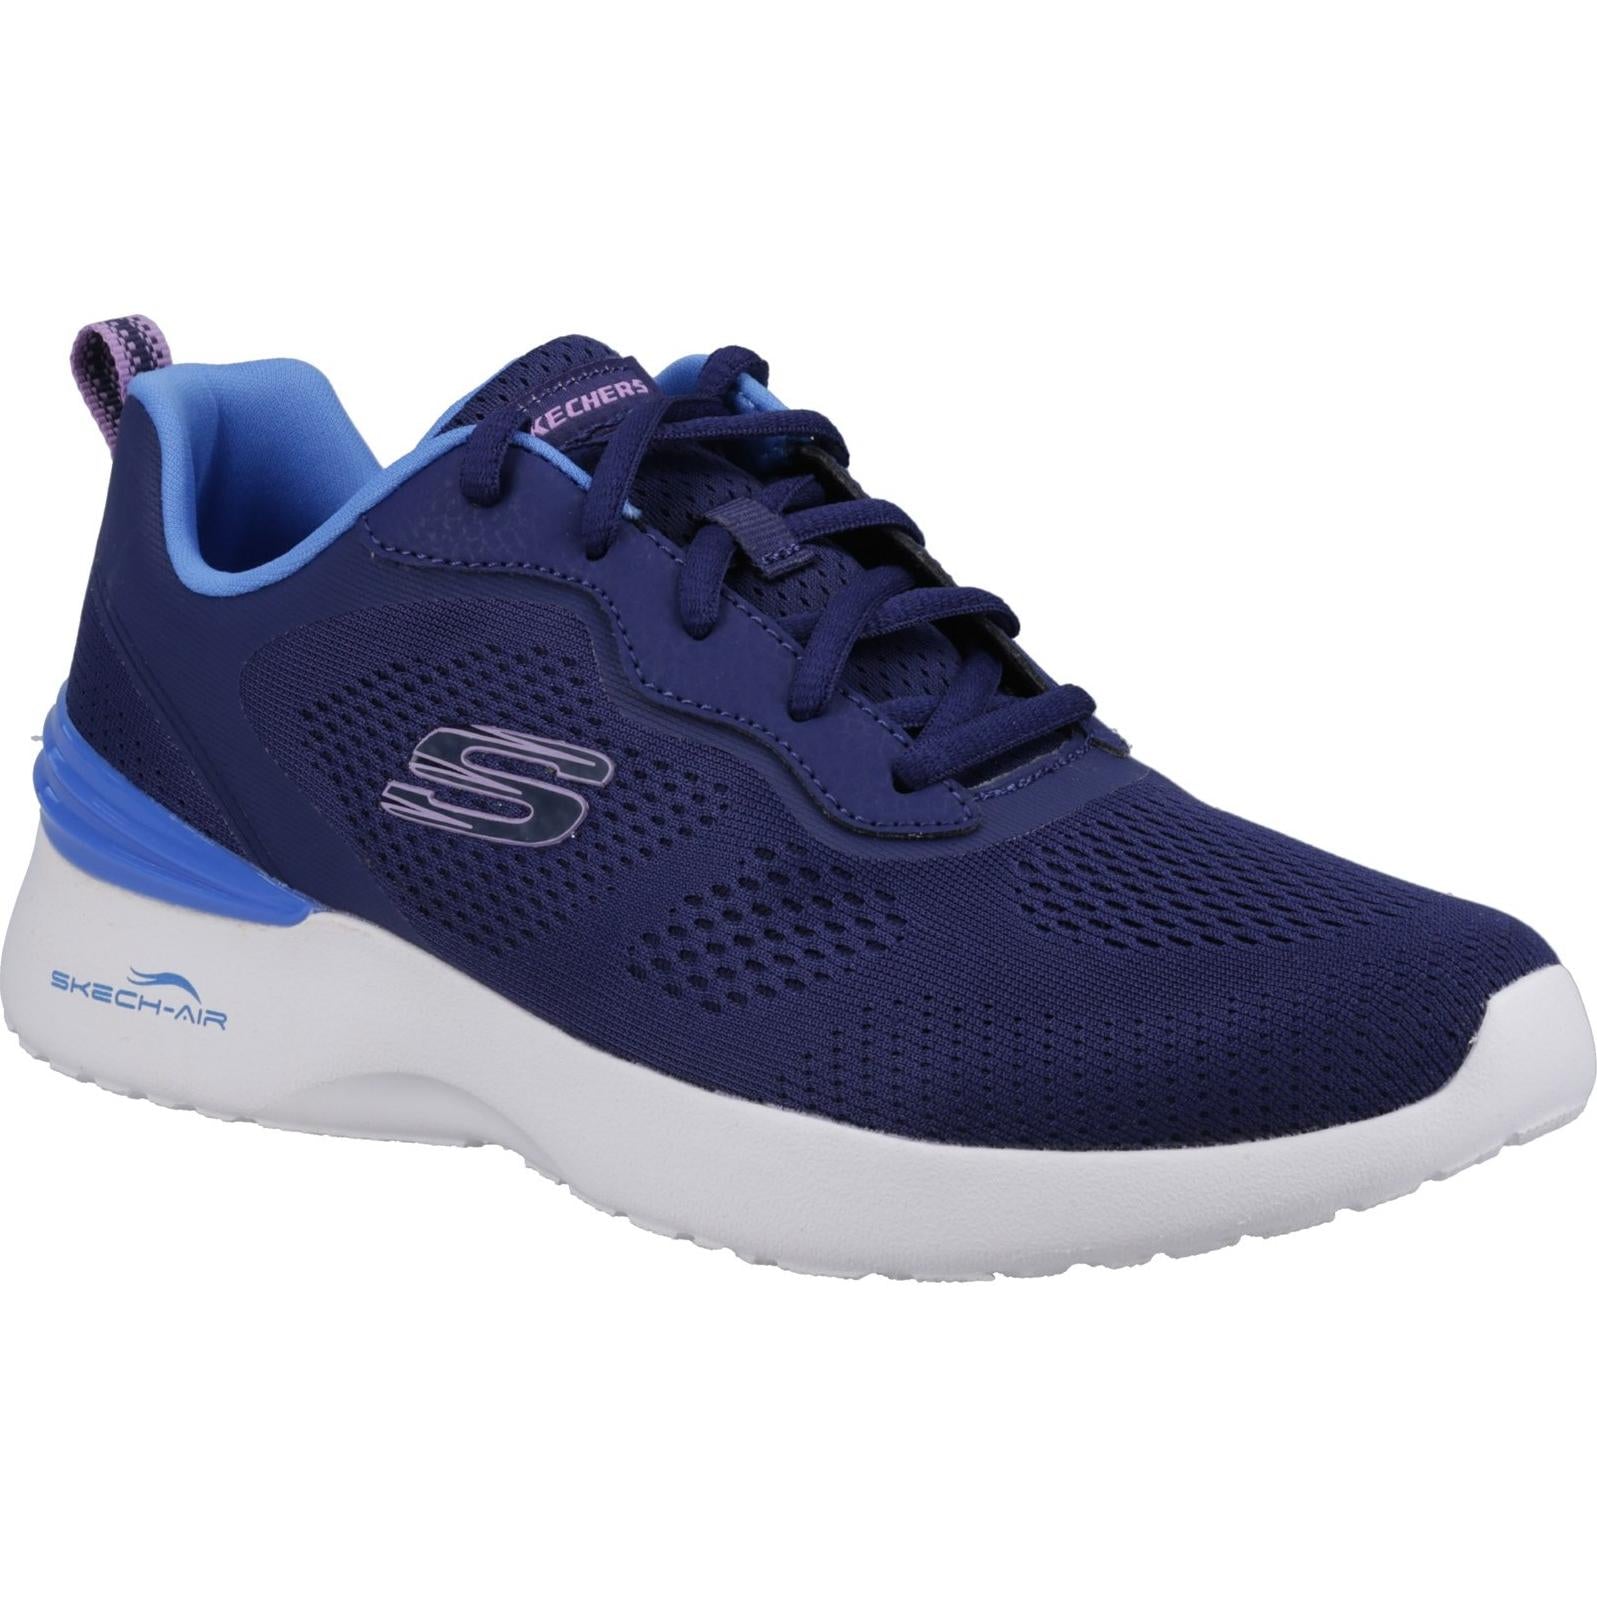 Skechers Skech-Air Dynamight New Grind Trainers